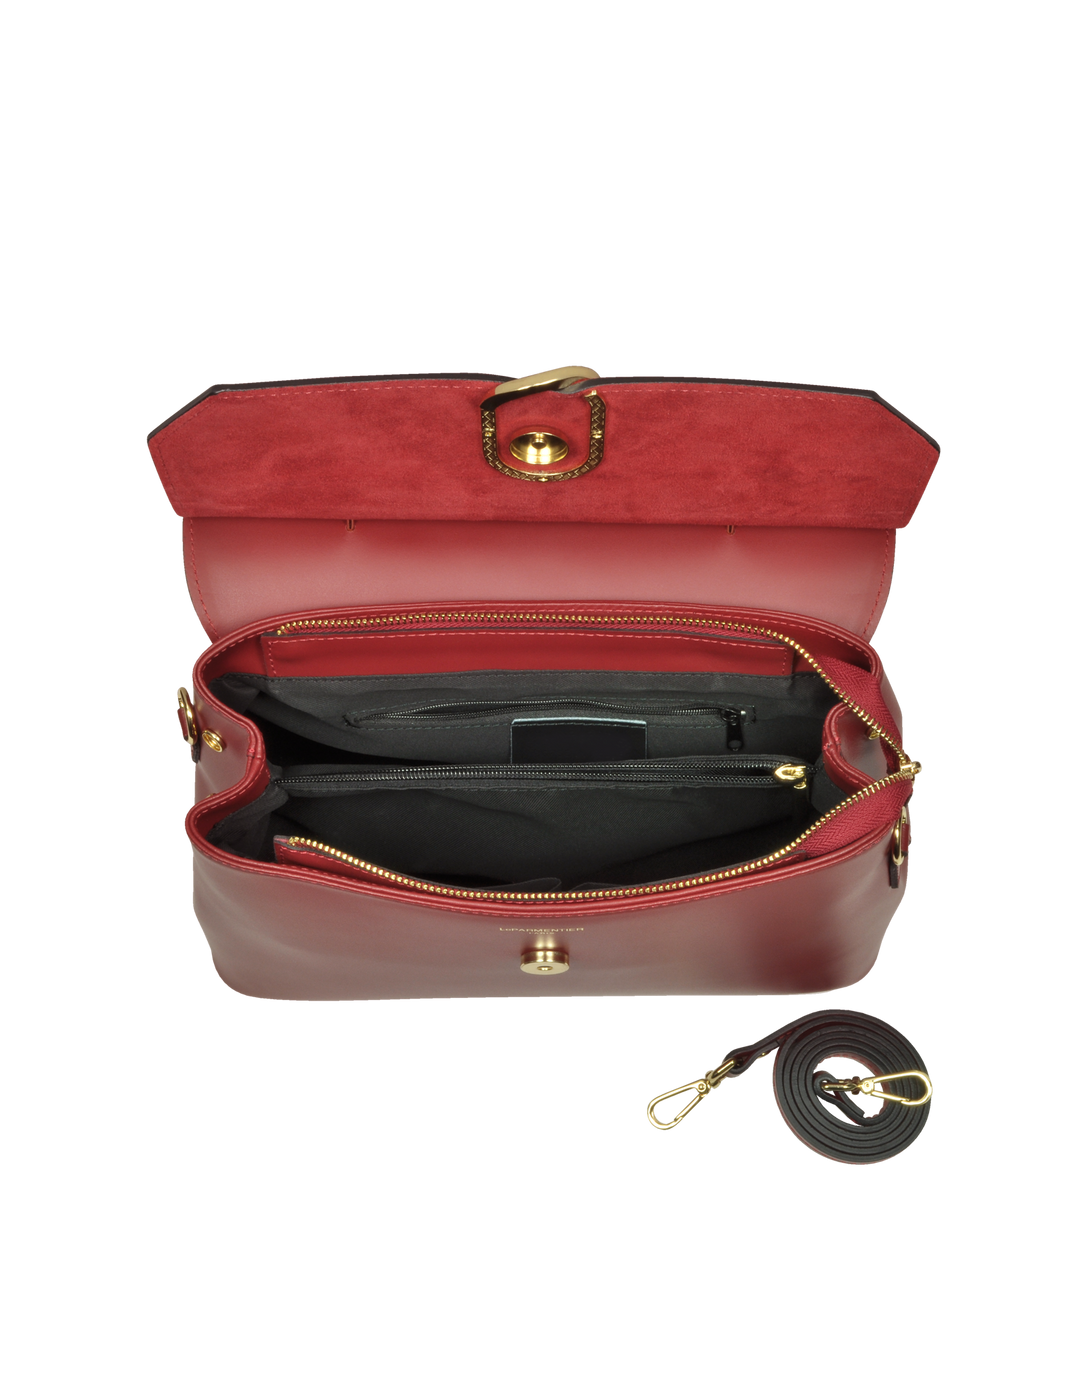 Red leather handbag with open top showing multiple compartments and detachable strap